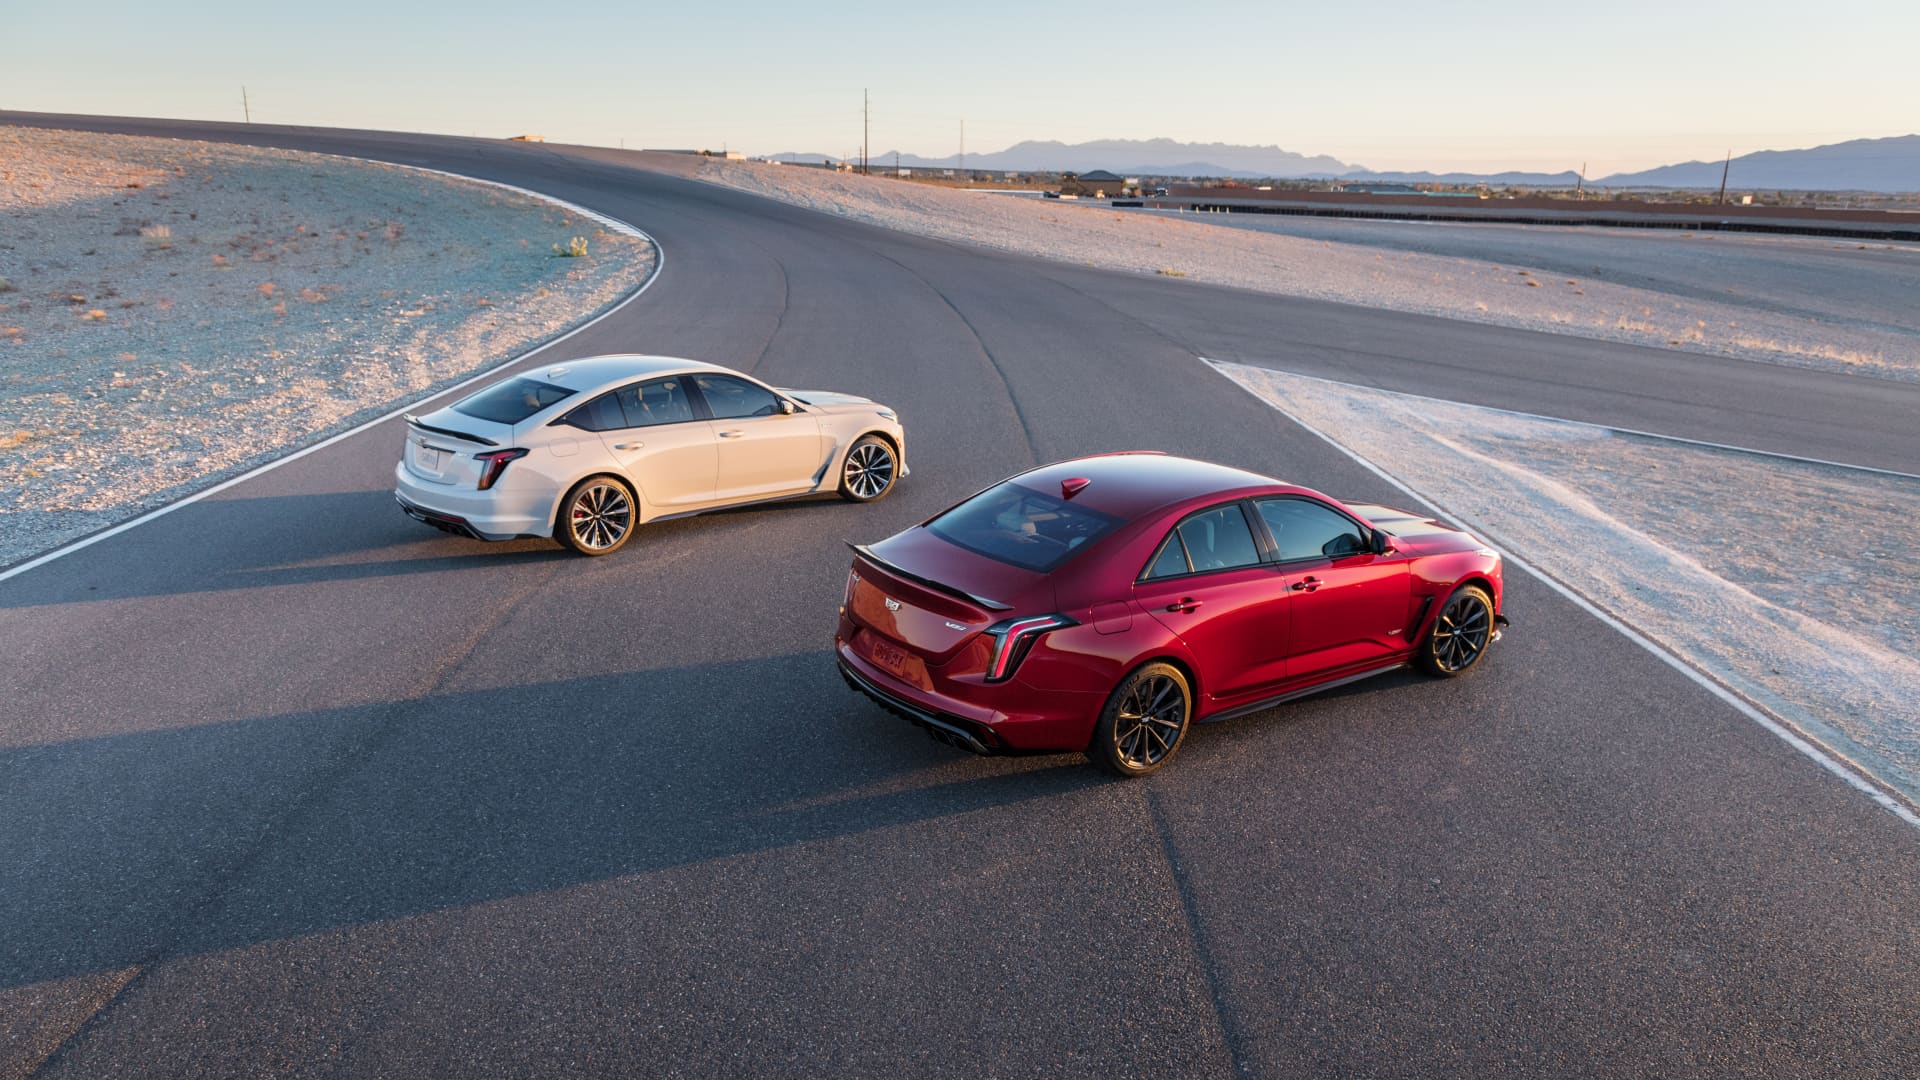 General Motors unveiled the 2022 Cadillac CT4-V Blackwing (left) and Cadillac CT5-V Blackwing on Feb. 1, 2021.